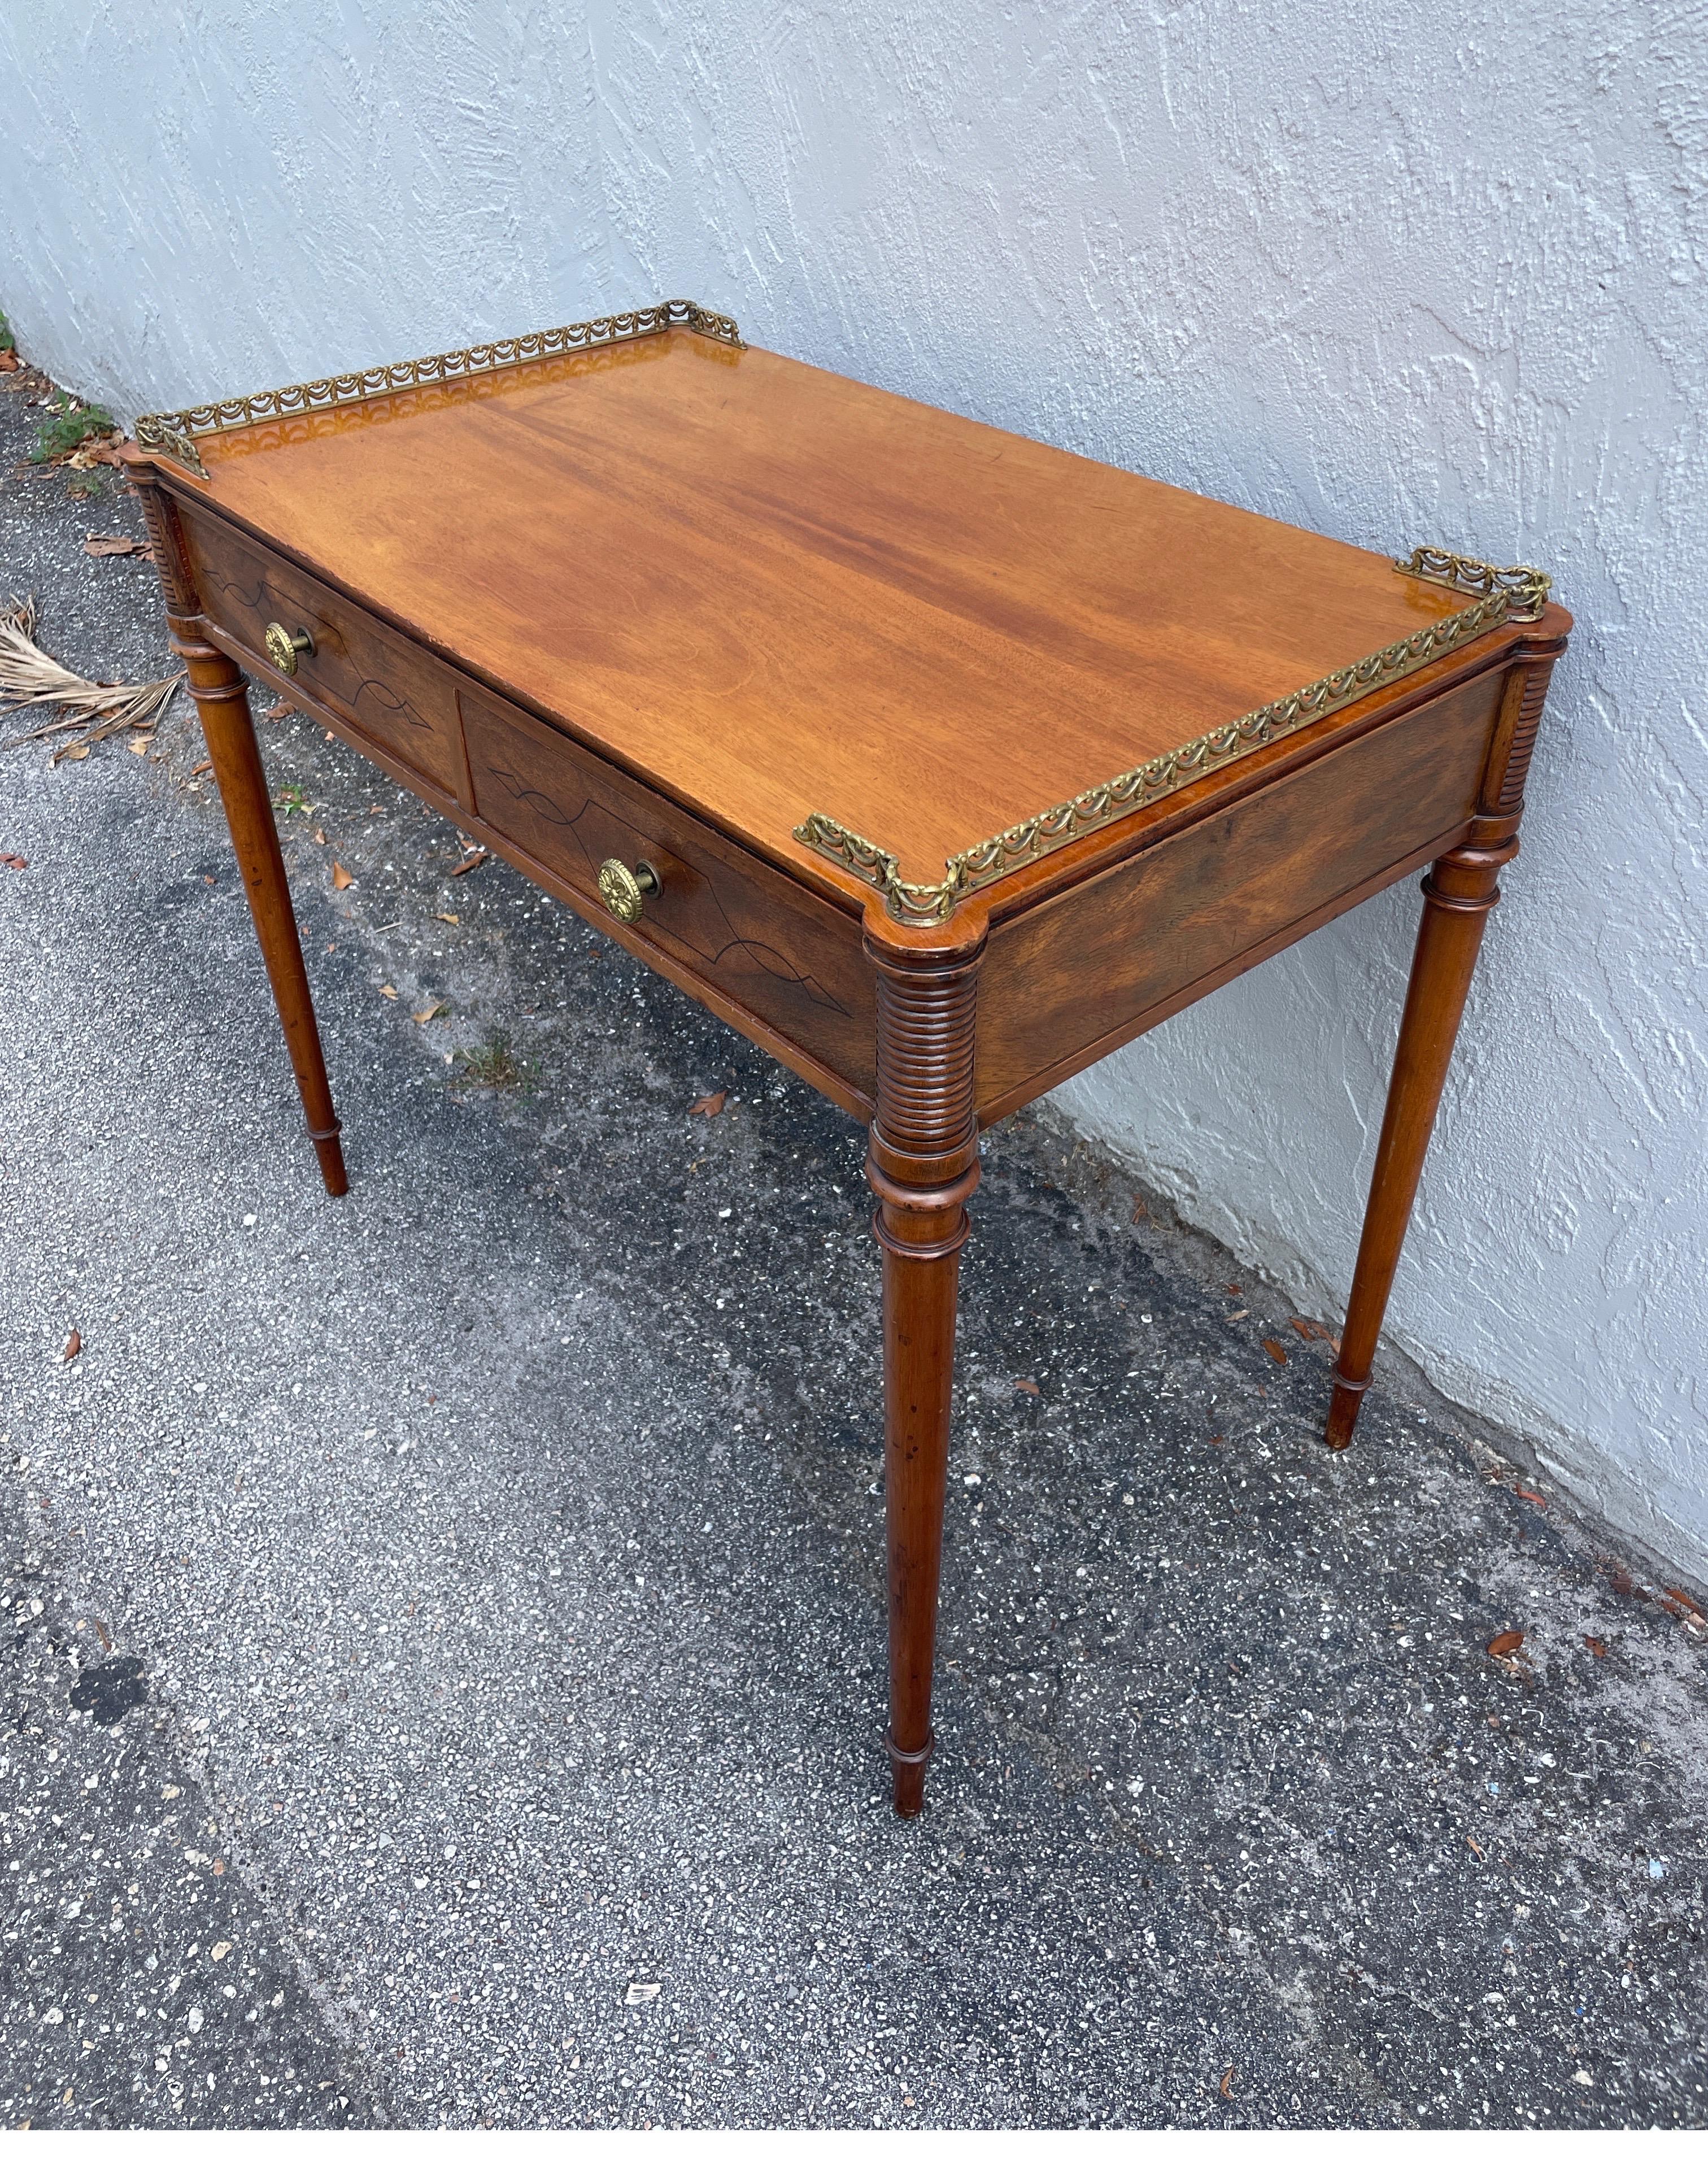 Vintage Beacon Hill small partner's desk / server with brass gallery and turret corners. Originally made for B. Altman & Co. Drawers can be accessed from both sides. A very versatile piece.